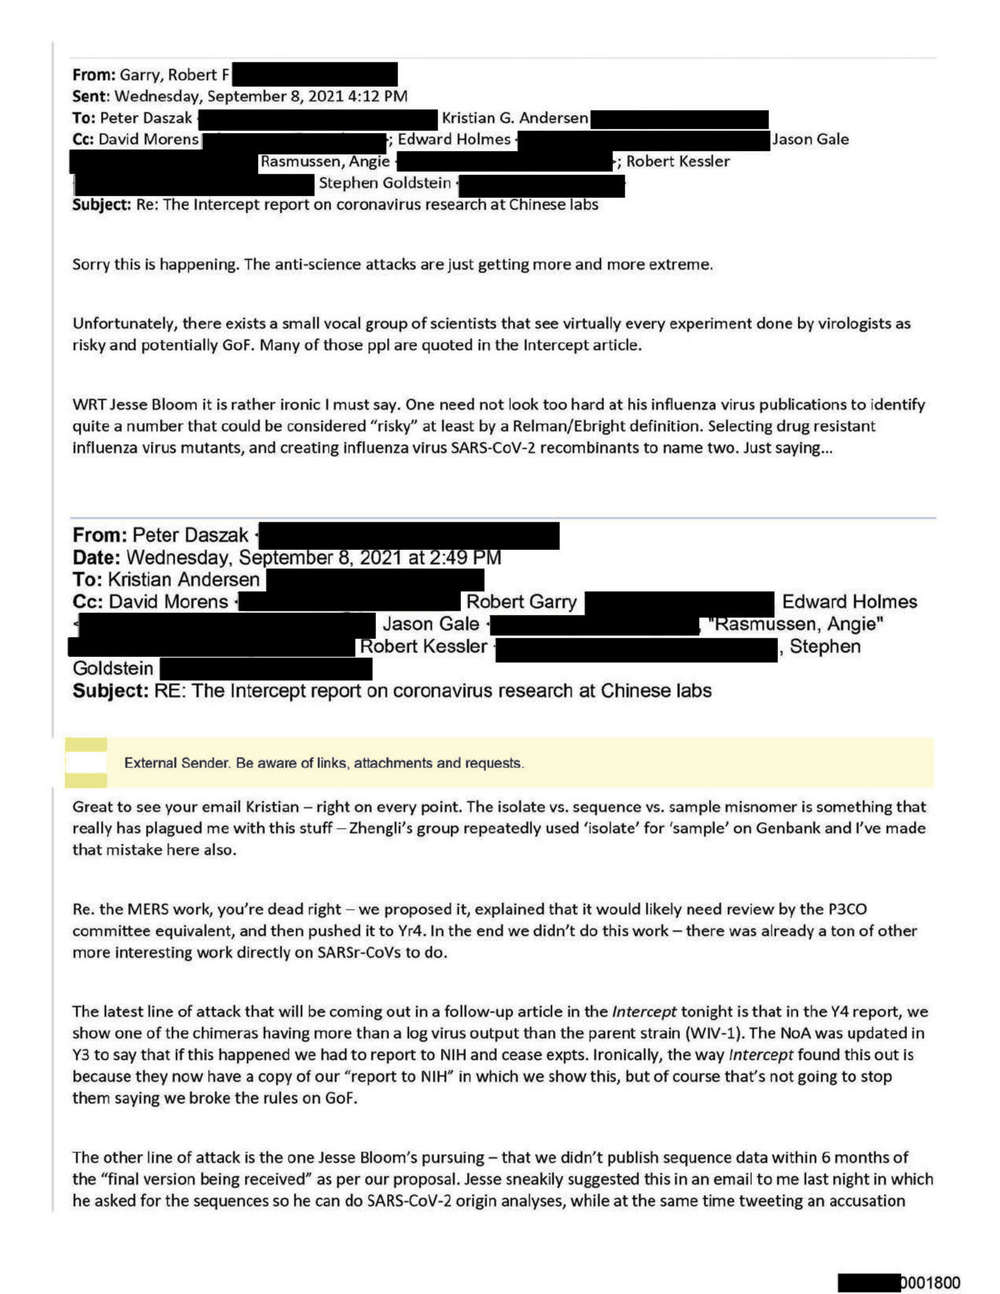 Page 27 from David Morens NIH Emails Redacted